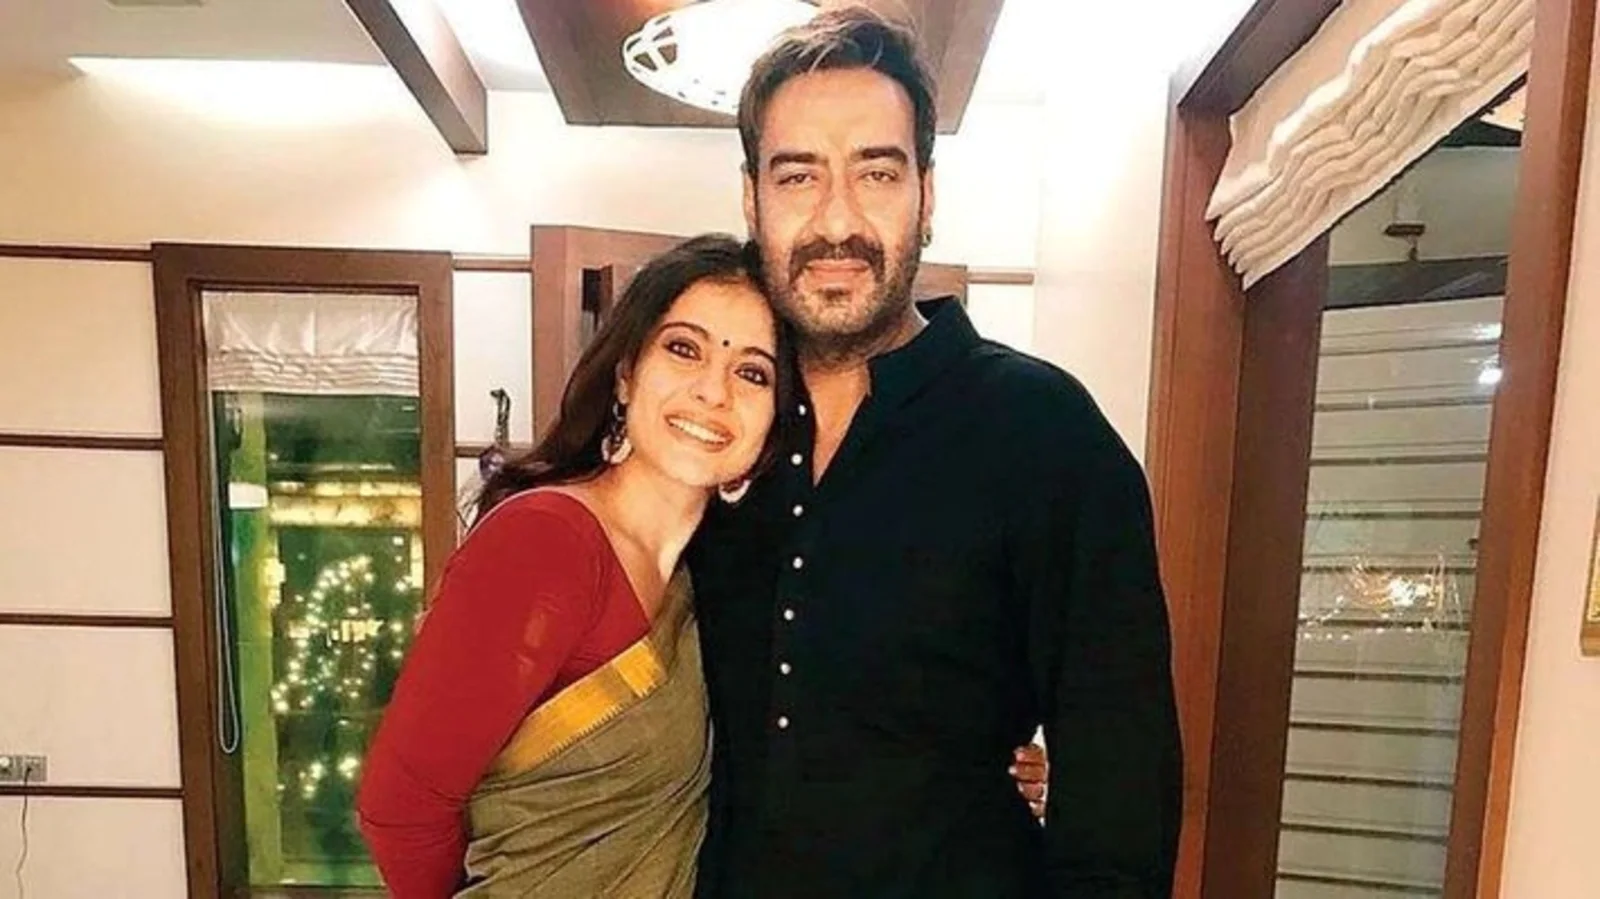 Ajay Devgn admits there are ‘ups and downs in marriage’ with wife Kajol: ‘Two minds will think differently’